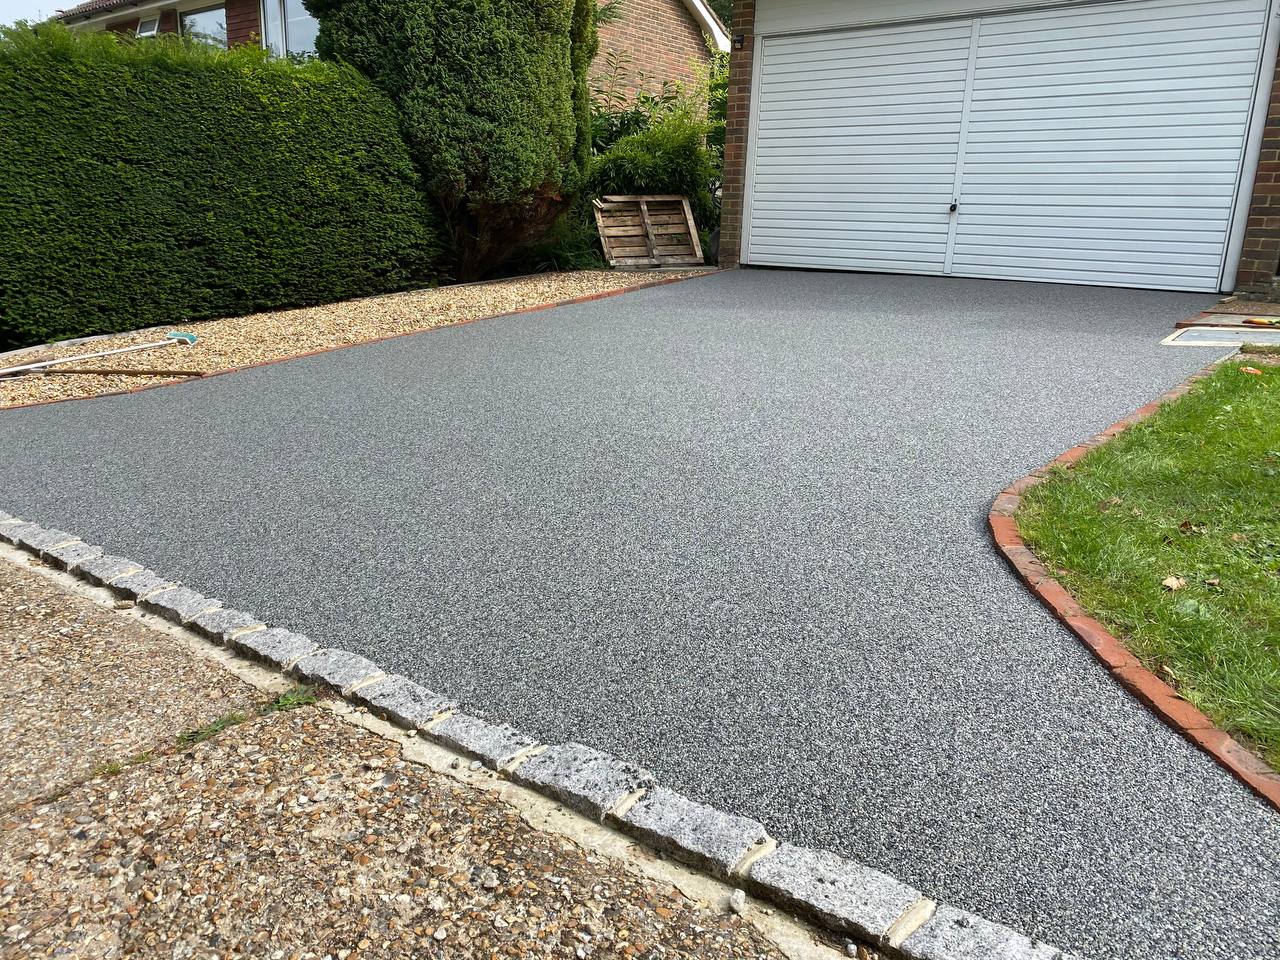 This is a photo of a new driveway installed in Hastings. Work carried out by Hastings Driveway Contractors